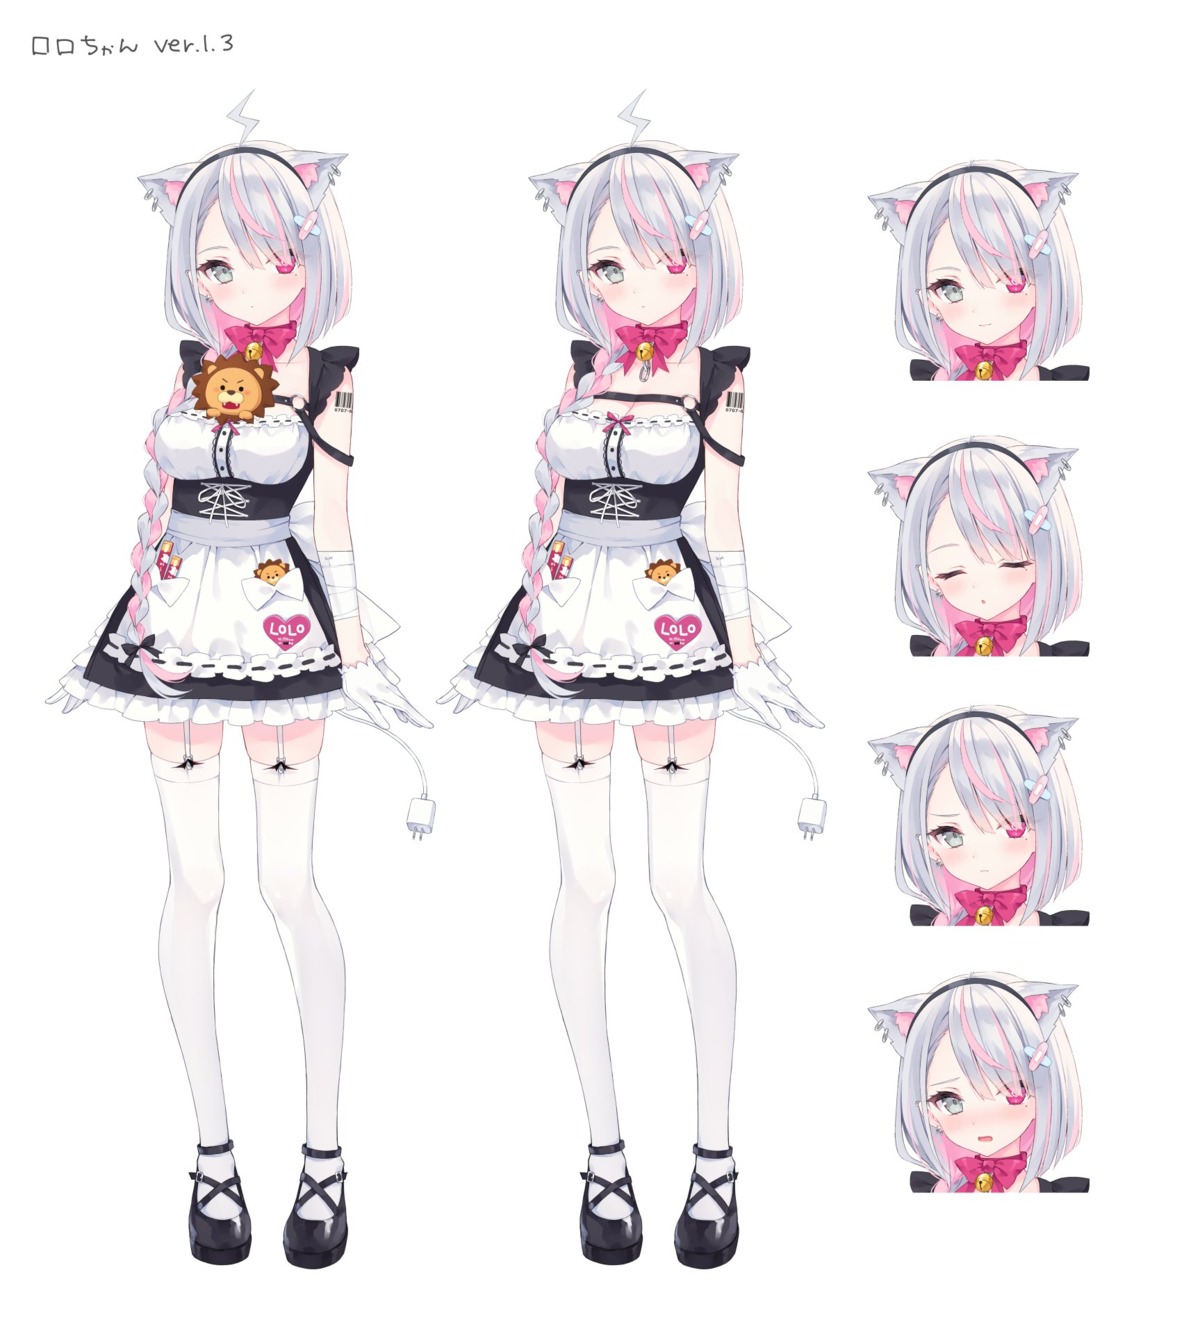 animal_ears character_design cleavage expression heterochromia maid roro-chan rurudo stockings tail tattoo thighhighs